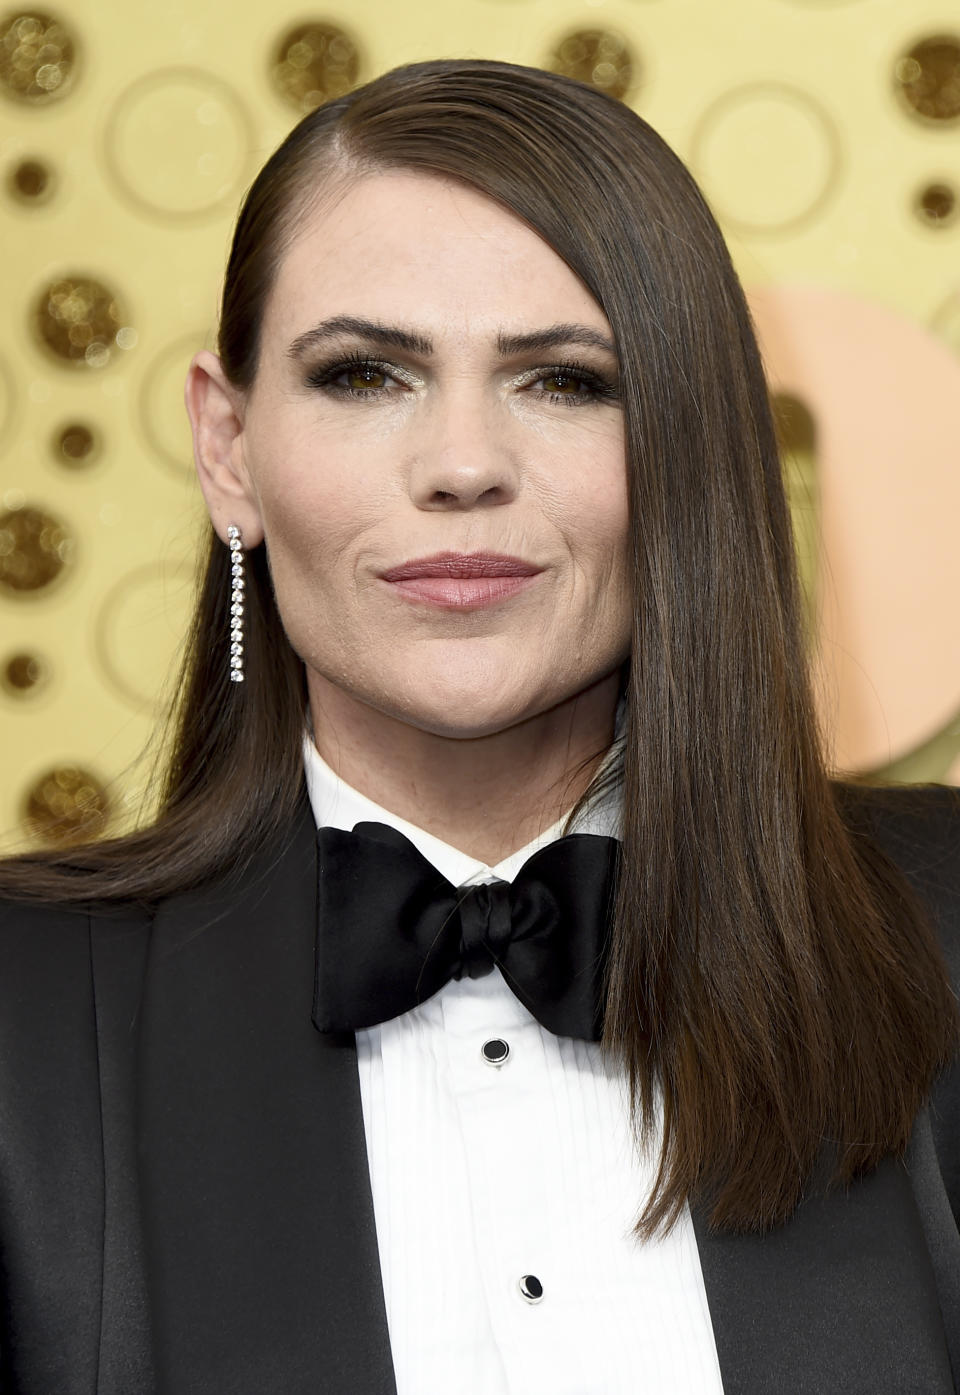 FILE - Clea DuVall arrives at the 71st Primetime Emmy Awards in Los Angeles on Sept. 22, 2019. DuVall is the co-creator of the new Amazon FreeVee series “High School." (Photo by Jordan Strauss/Invision/AP, File)